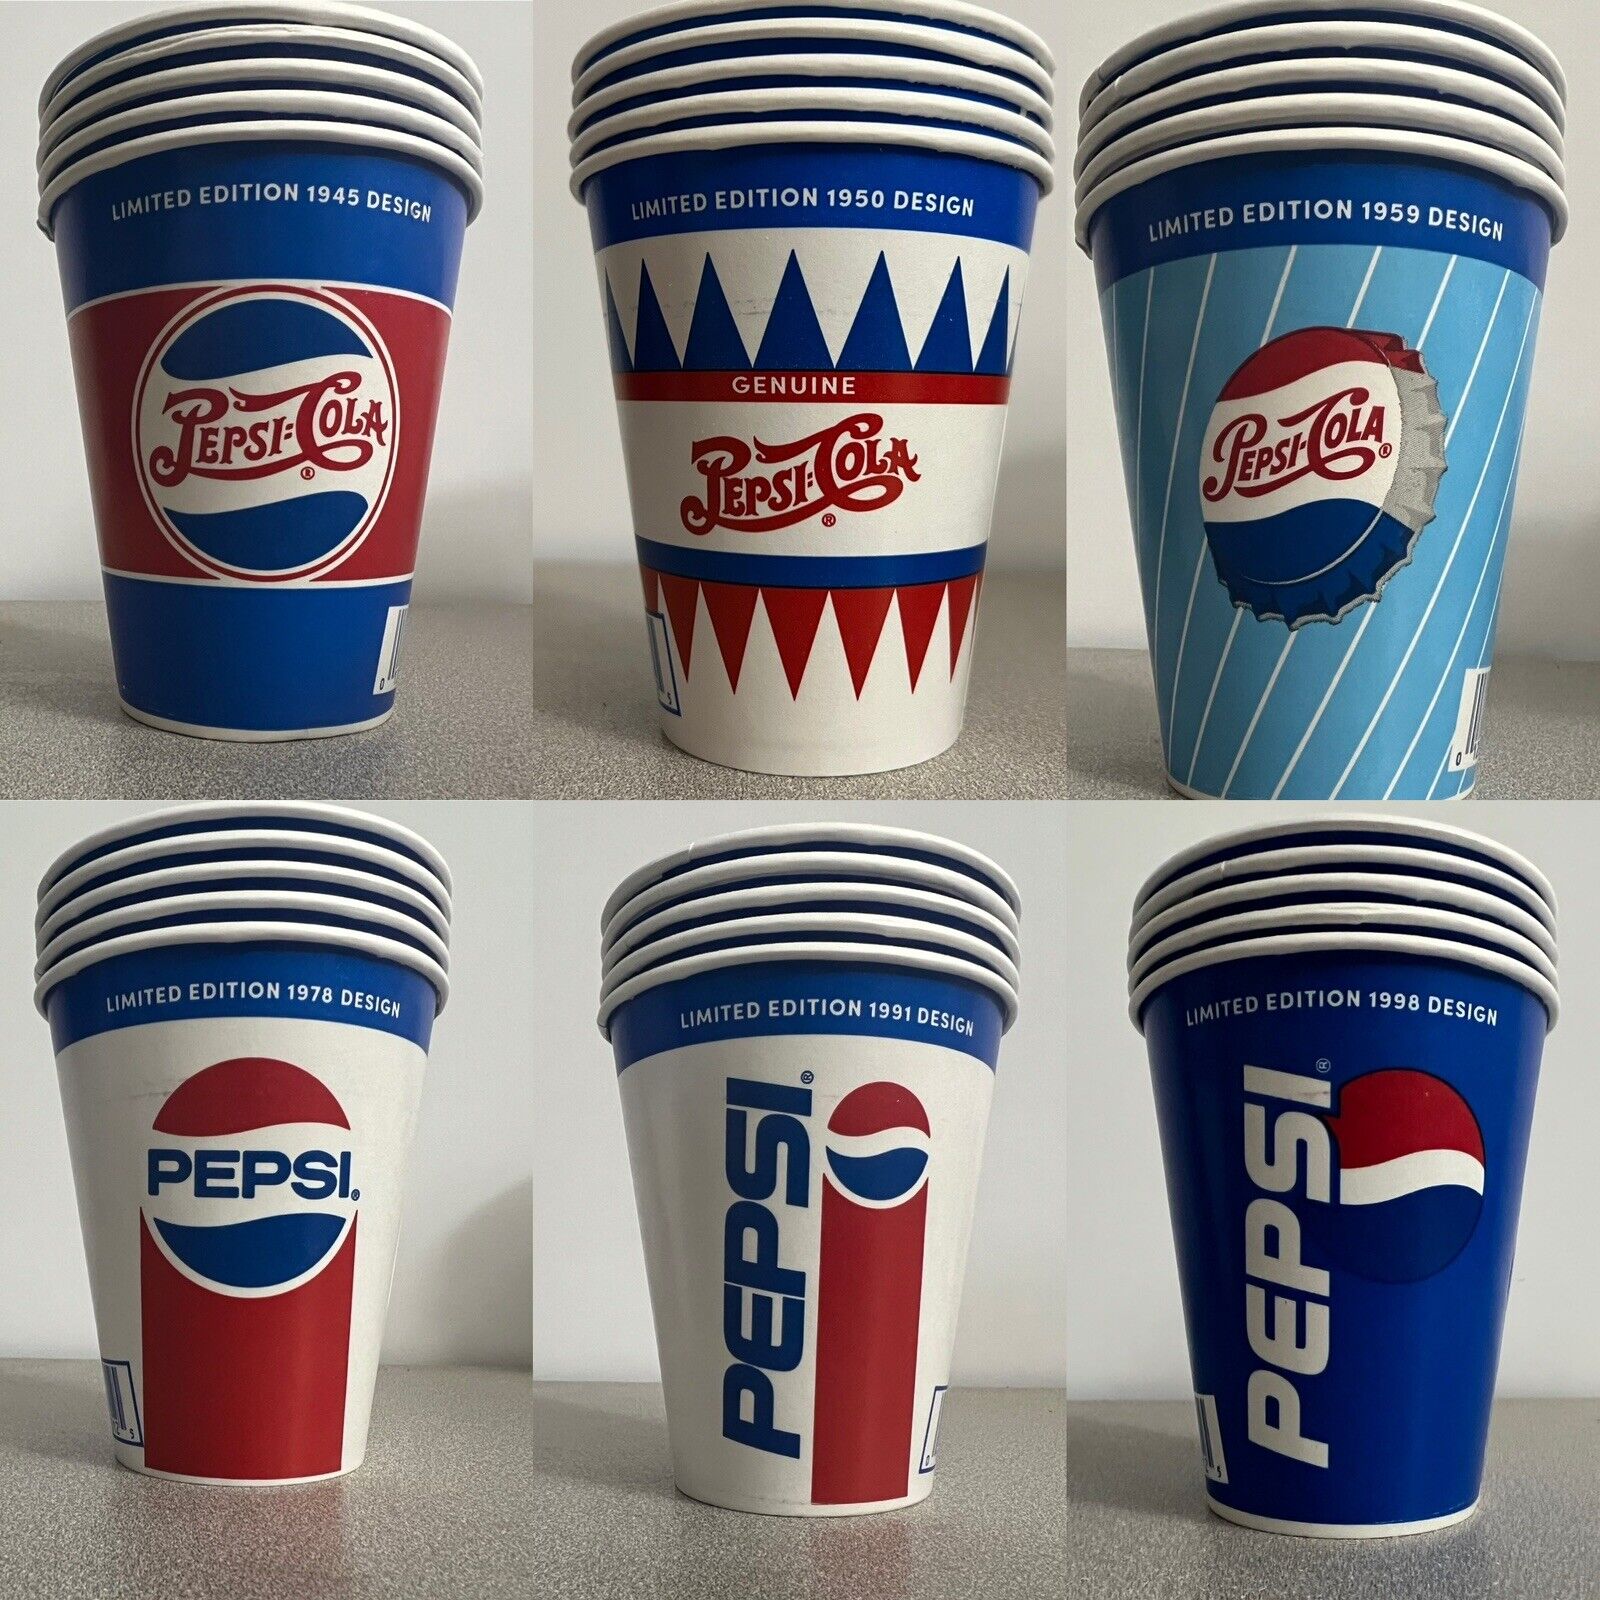 *NEW PEPSI PAPER COLLECTOR CUPS*|5 of Each of The 6 Designs|1945/50/59/78/91/98